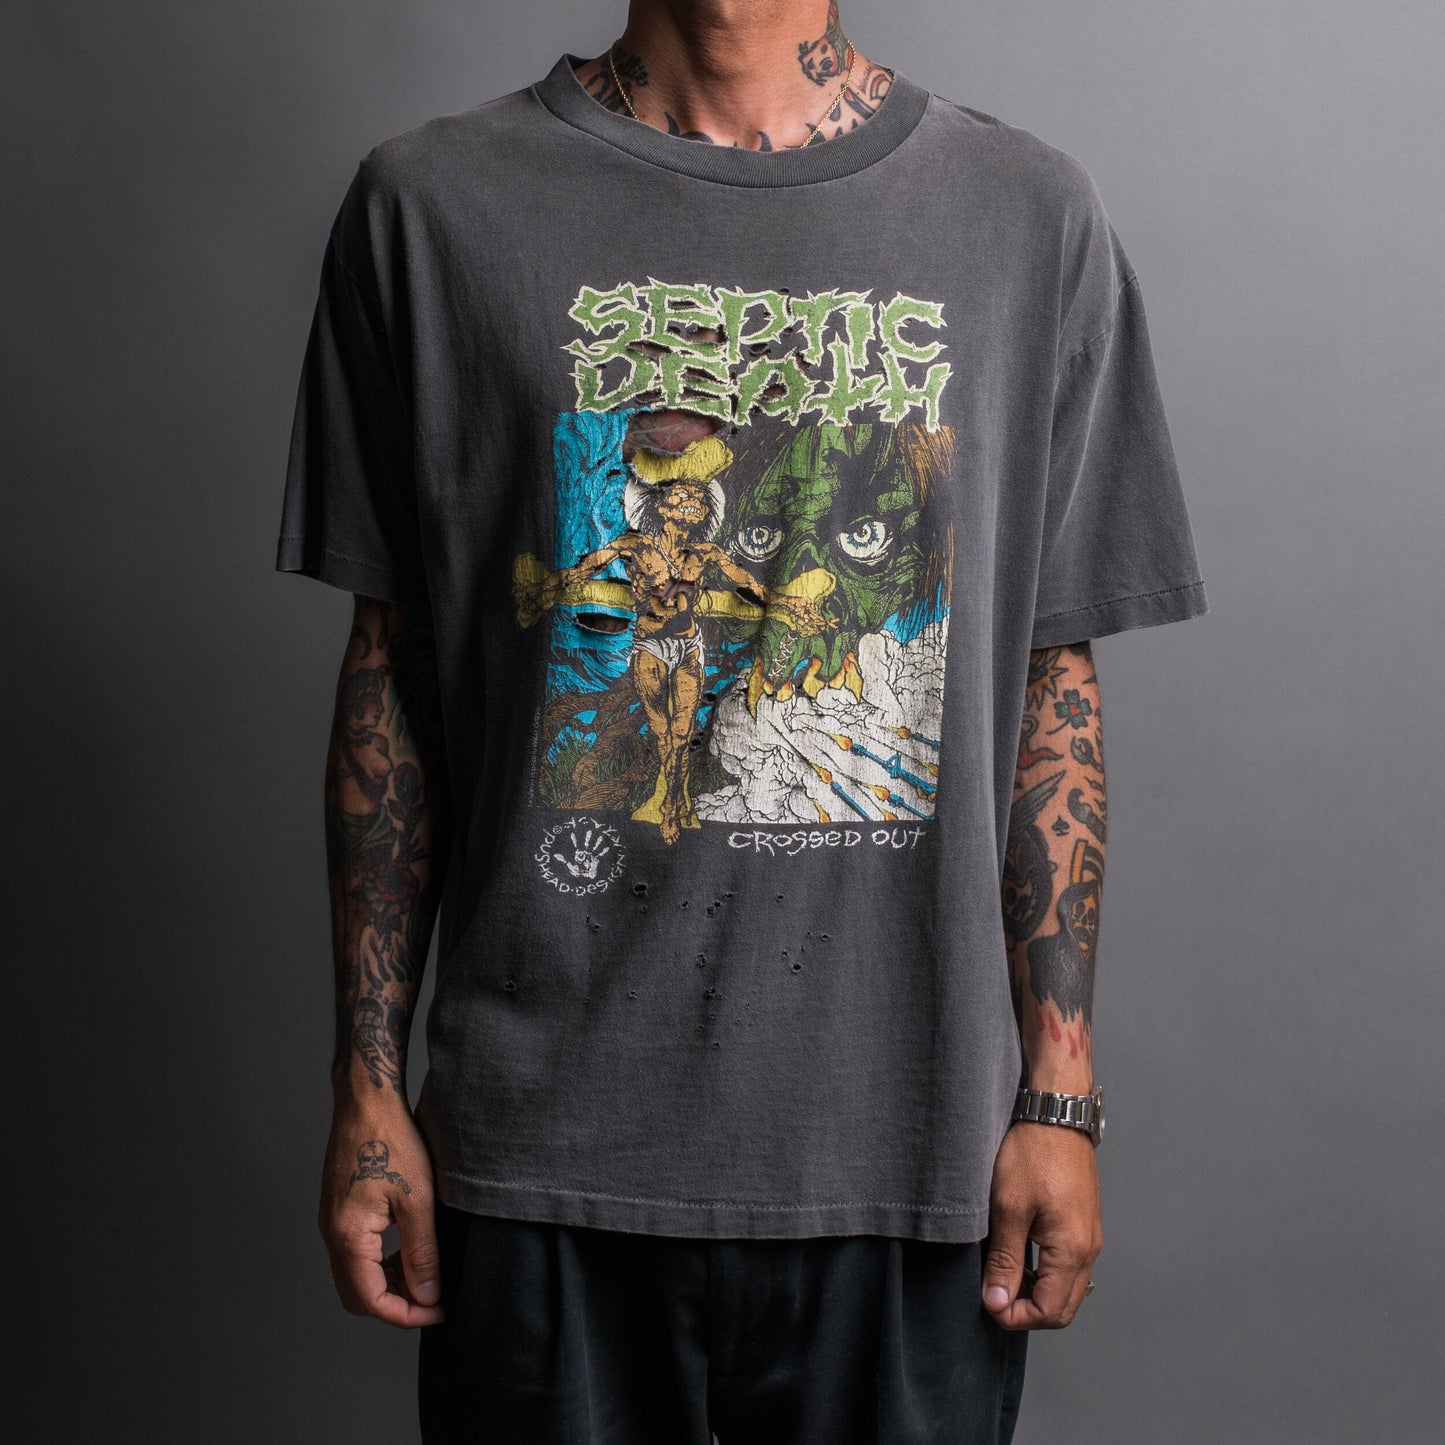 Vintage 90’s Septic Death Crossed Out T-Shirt